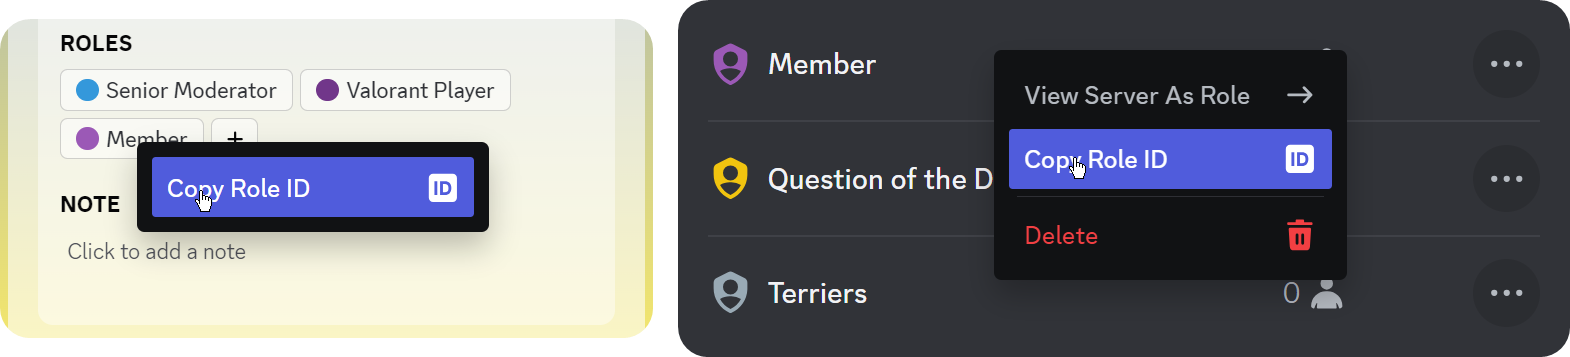 Examples of the "Copy Role ID" button in the context menus of Discord roles in a Discord profile and the Roles section of the server settings of a Discord server